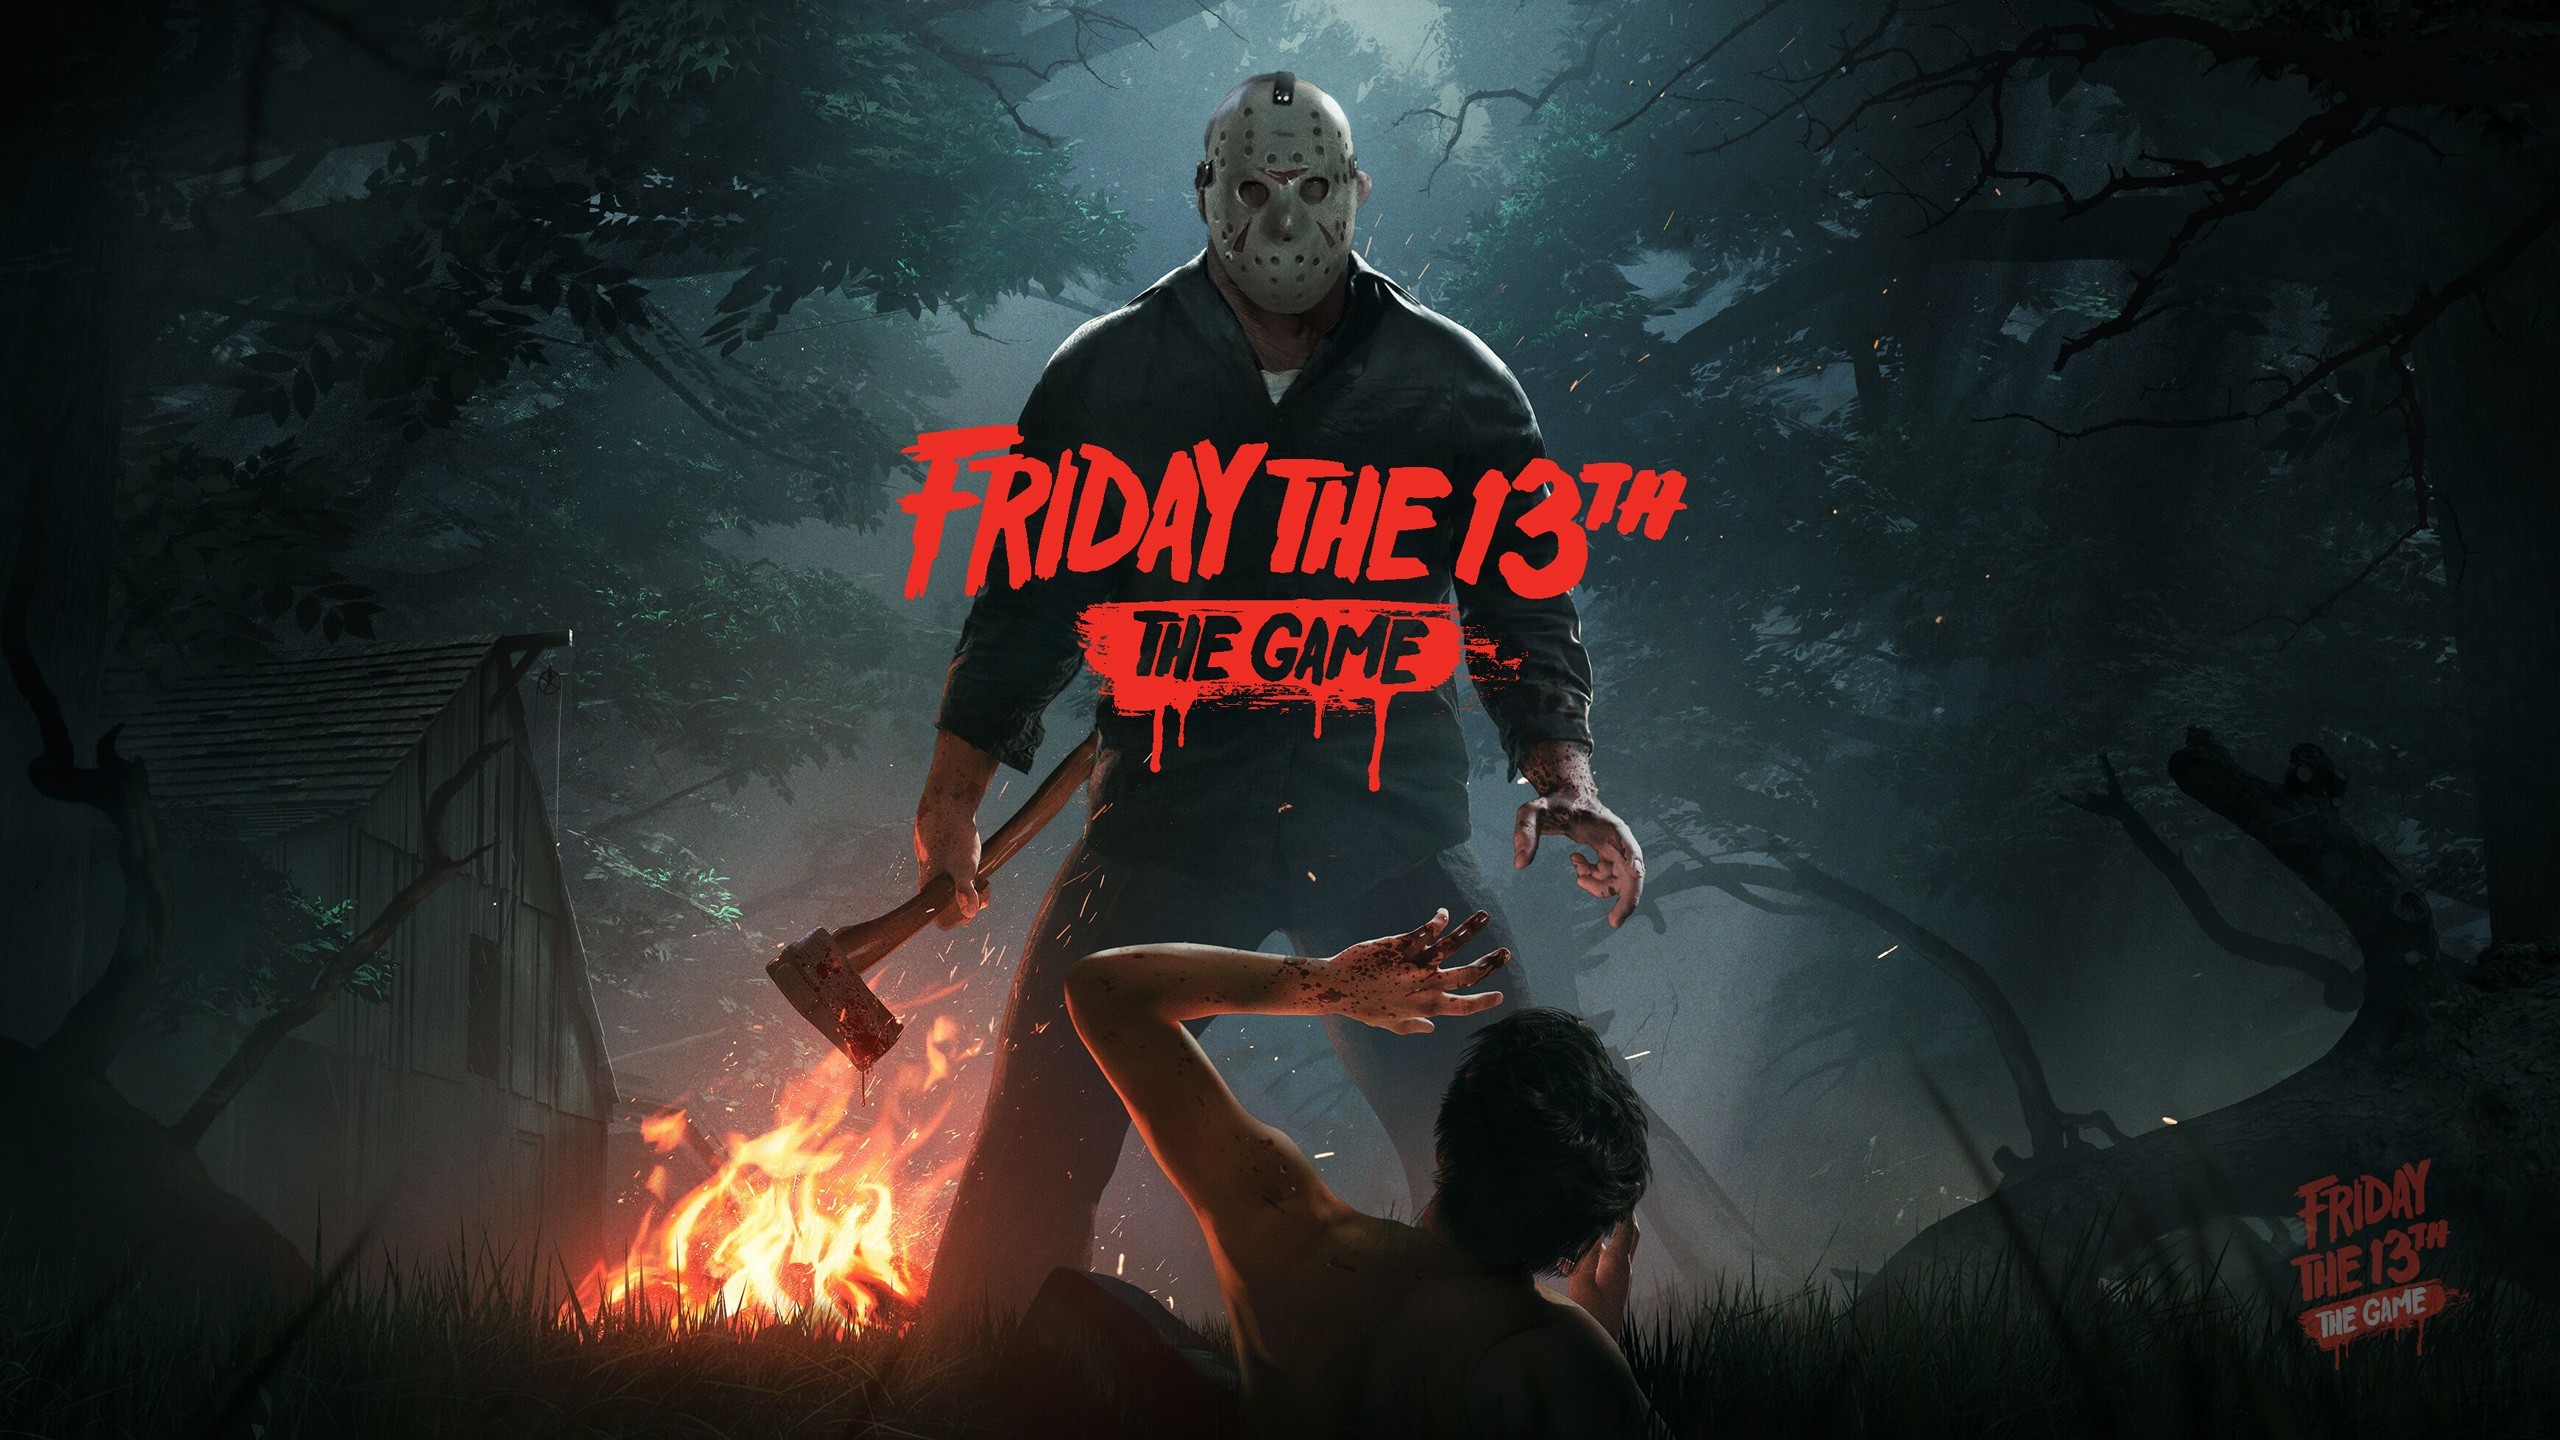 friday_the_13th_the_game-2560x1440.jpg